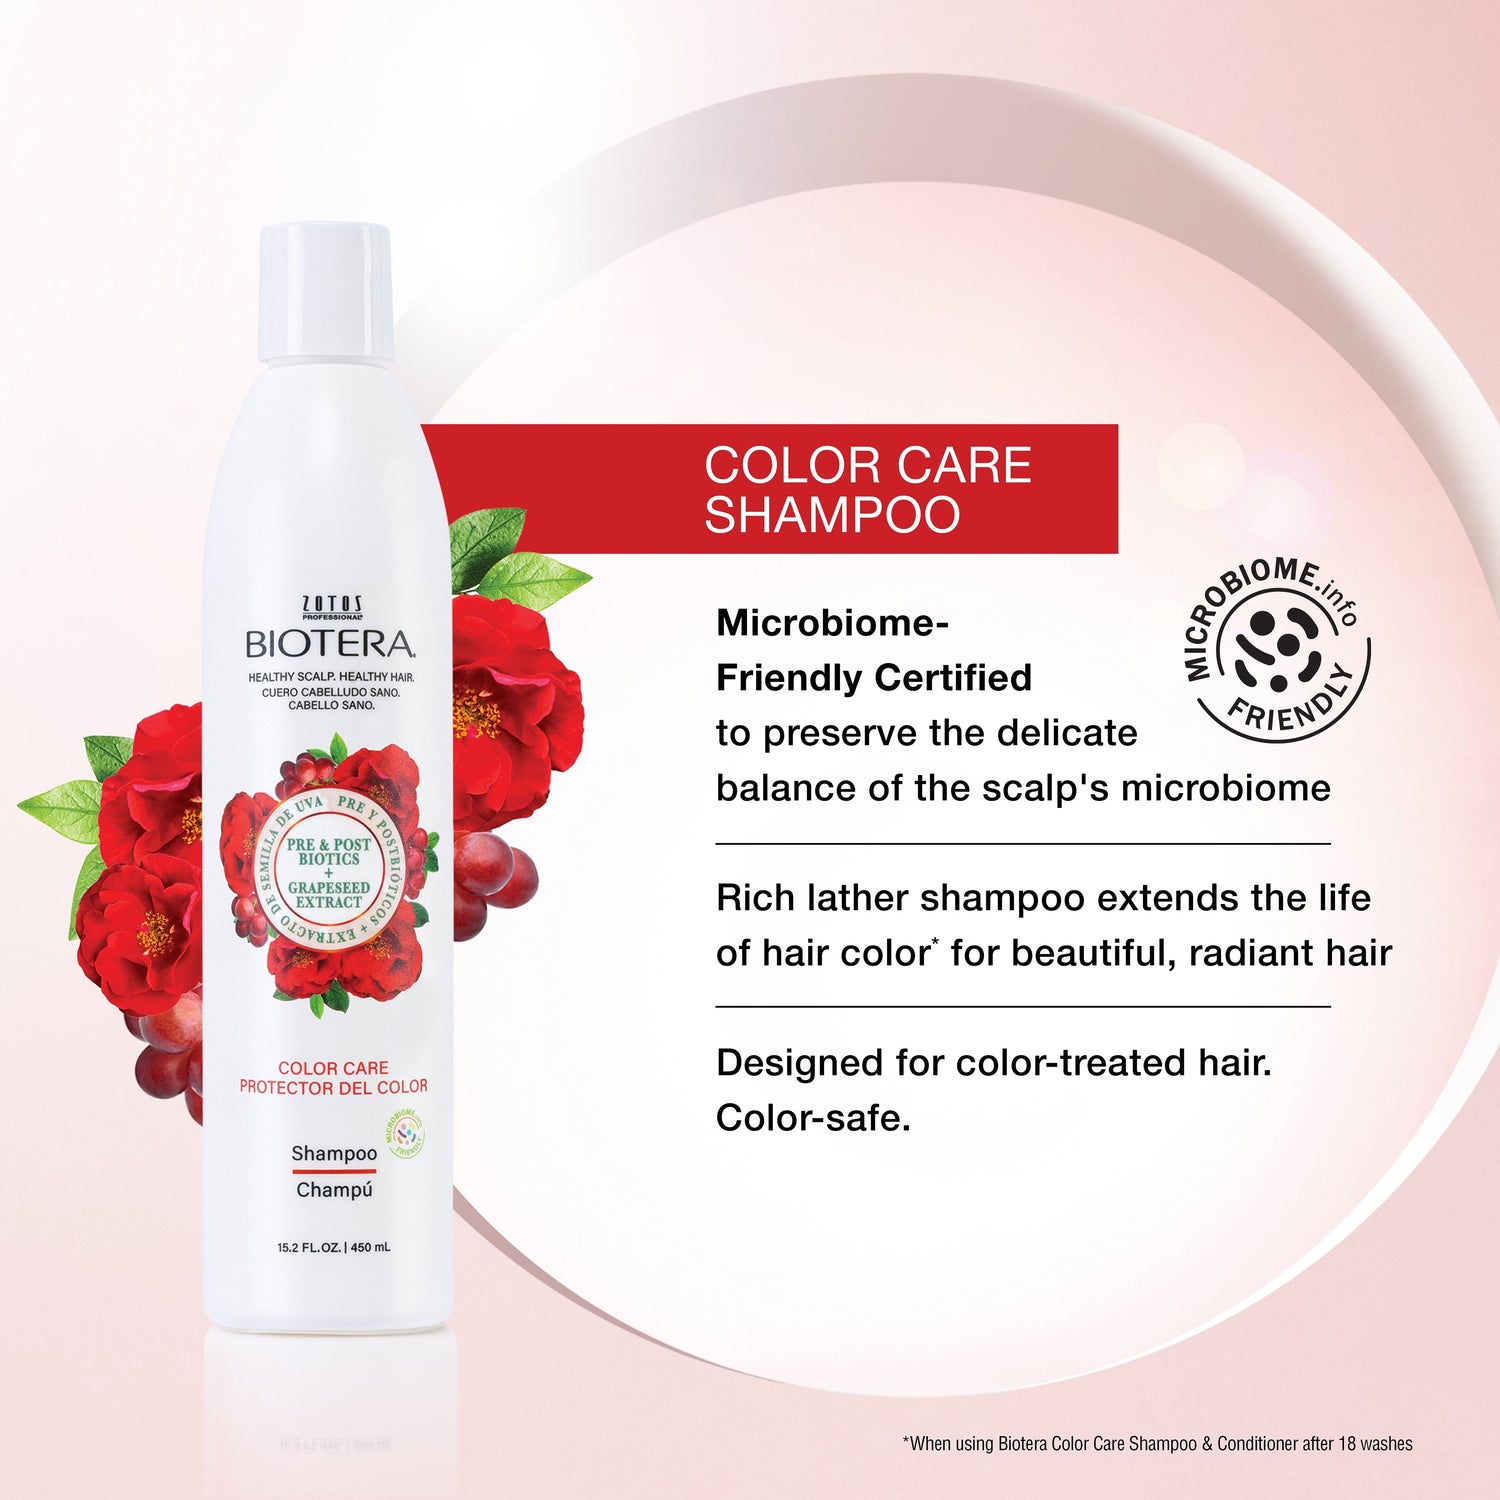 Color Care Shampoo is Microbiome-Friendly Certified to preserve the delicate balance of the scalp's microbiome. Rich lather shampoo extends the life of hair color for beautiful, radiant hair. Designed for color-treated hair. Color safe.